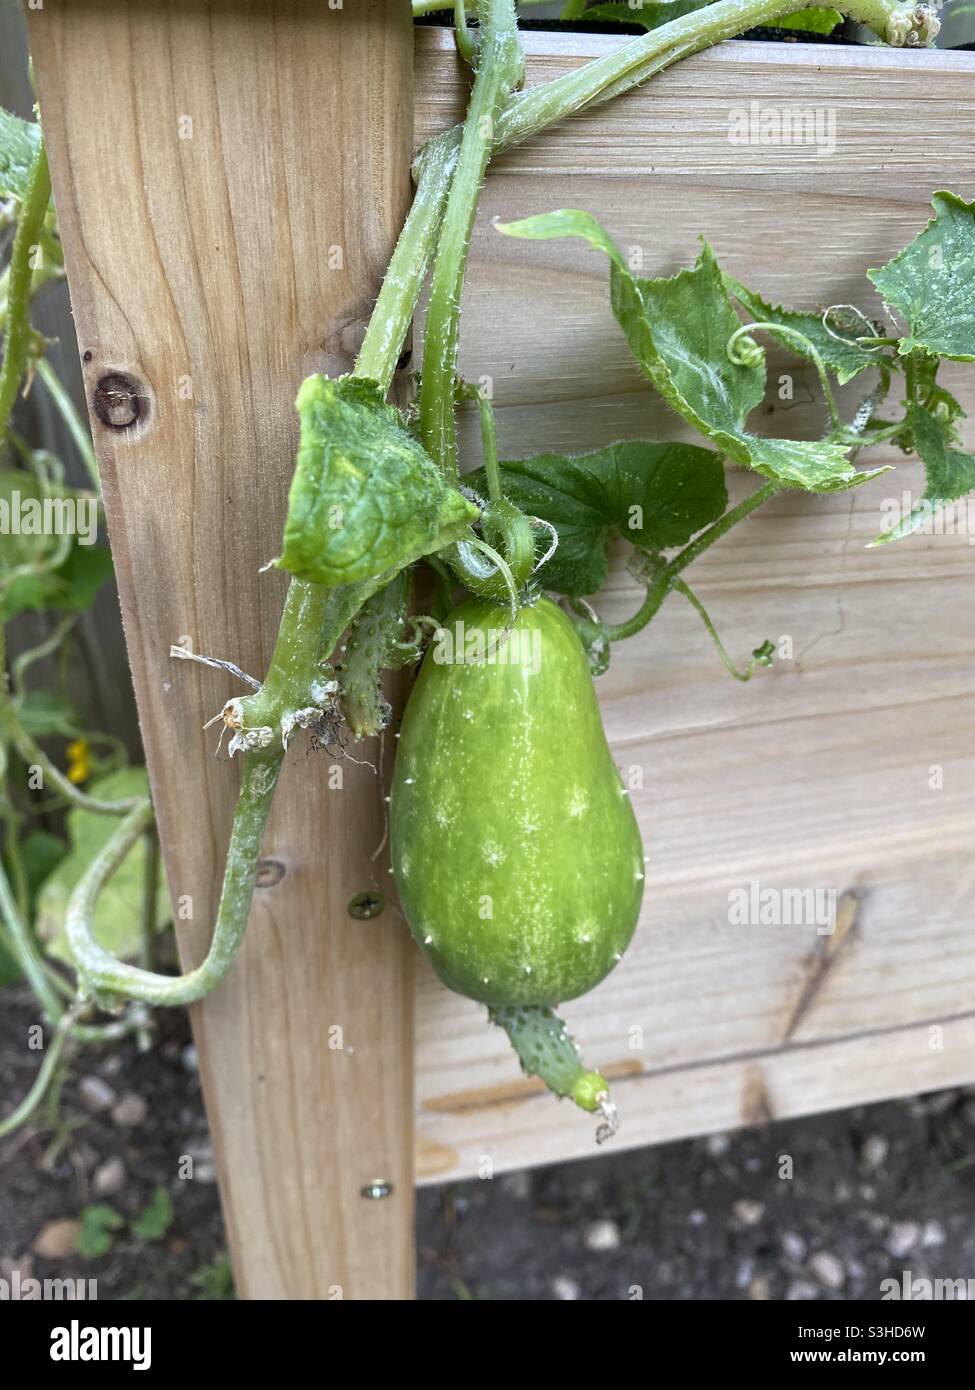 A funny shaped cucumber grows on the vine in a backyard garden. Stock Photo